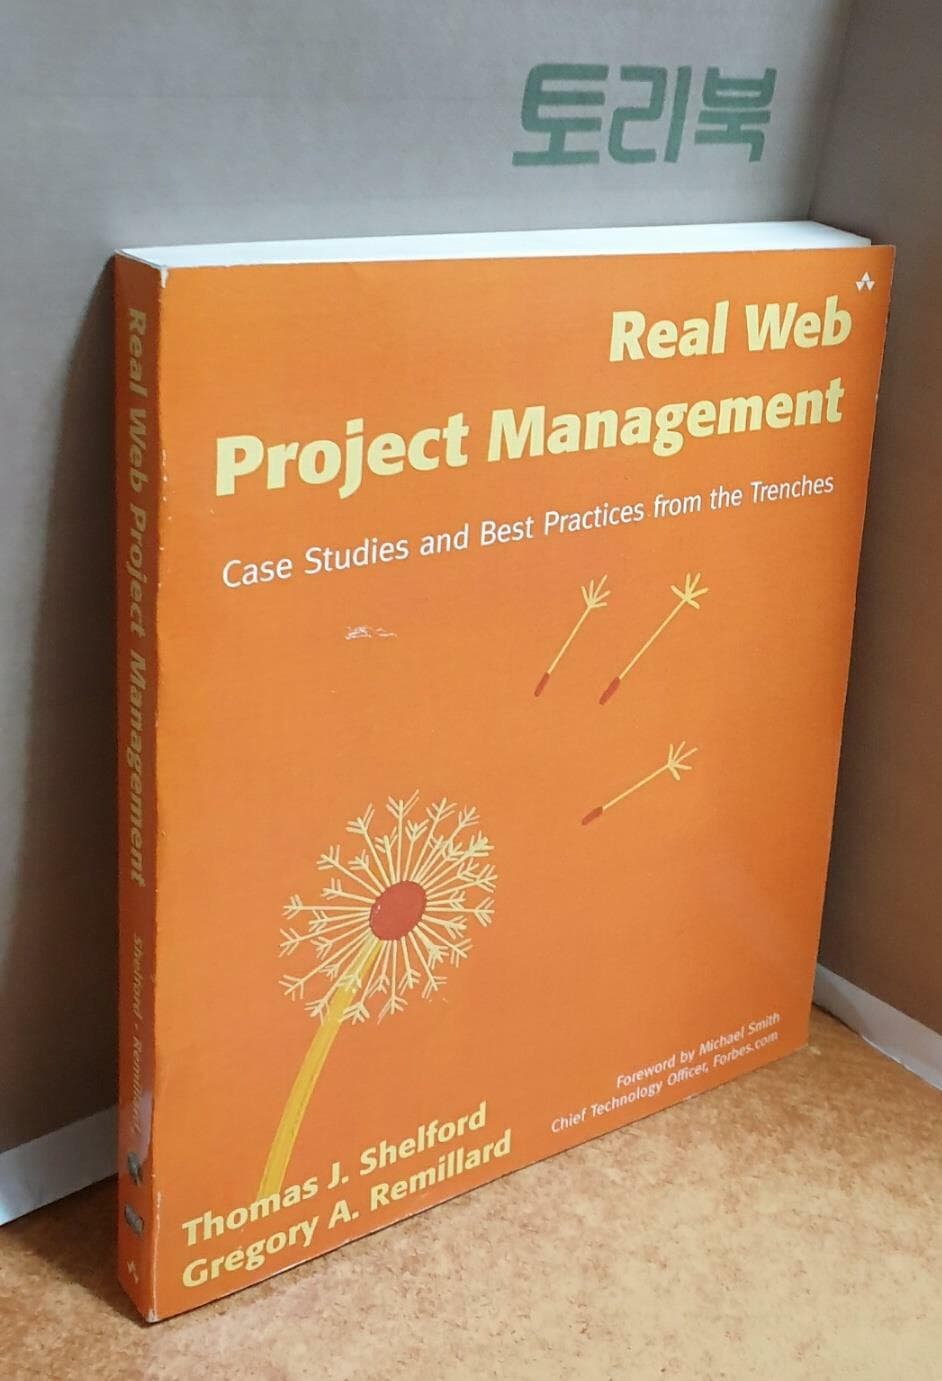 Real Web Project Management: Case Studies and Best Practices from the Trenches [With Cdrm]